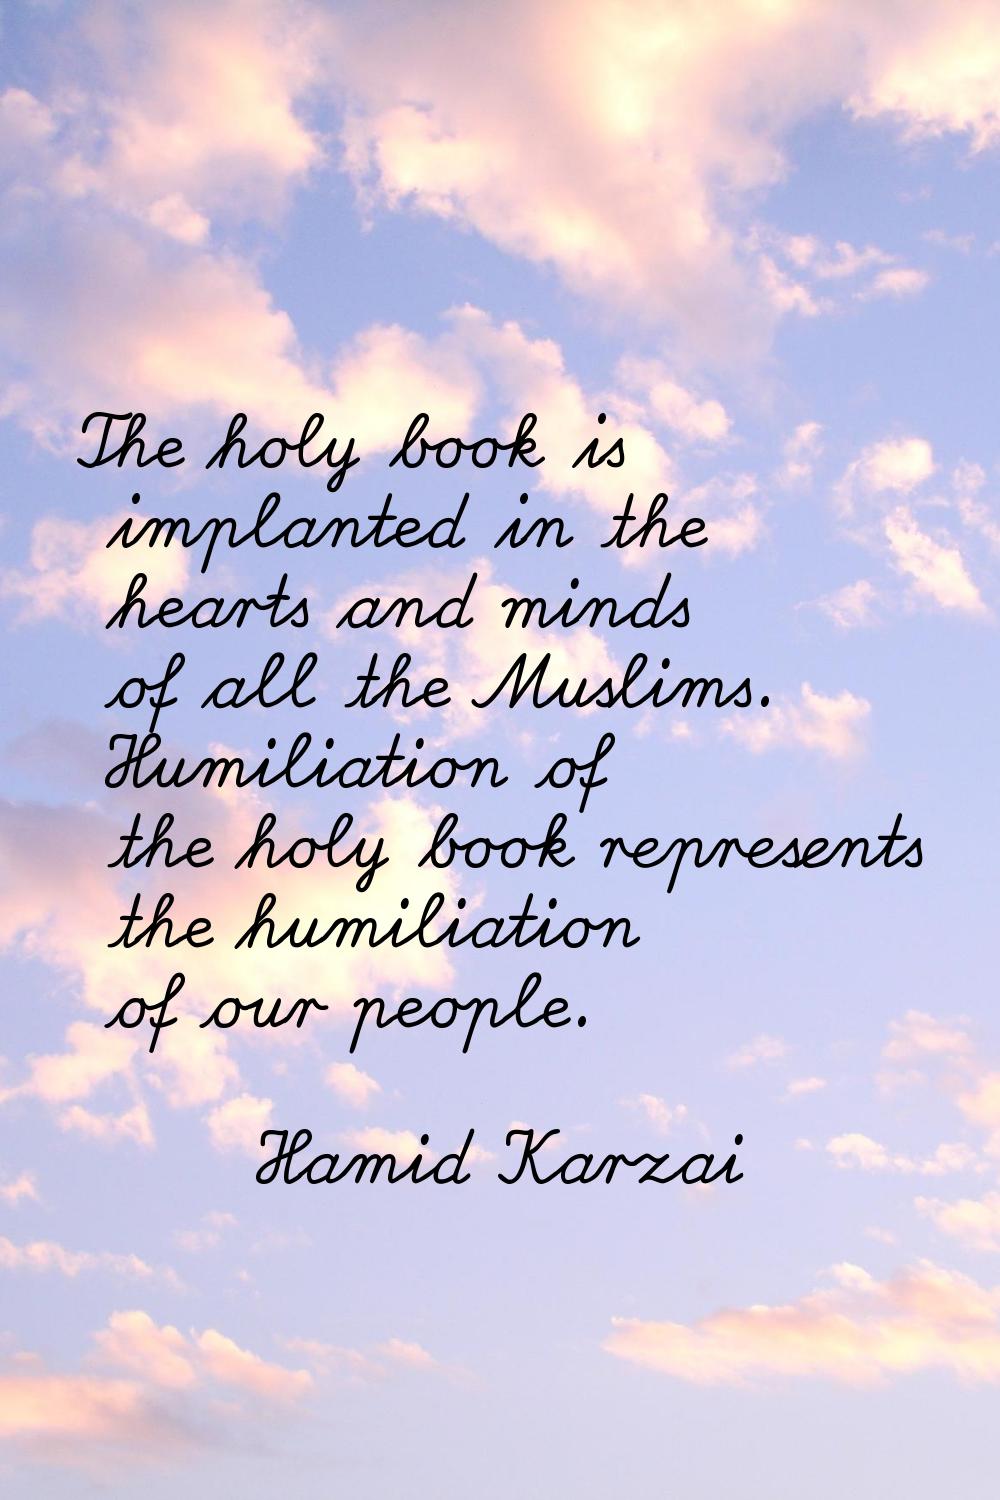 The holy book is implanted in the hearts and minds of all the Muslims. Humiliation of the holy book